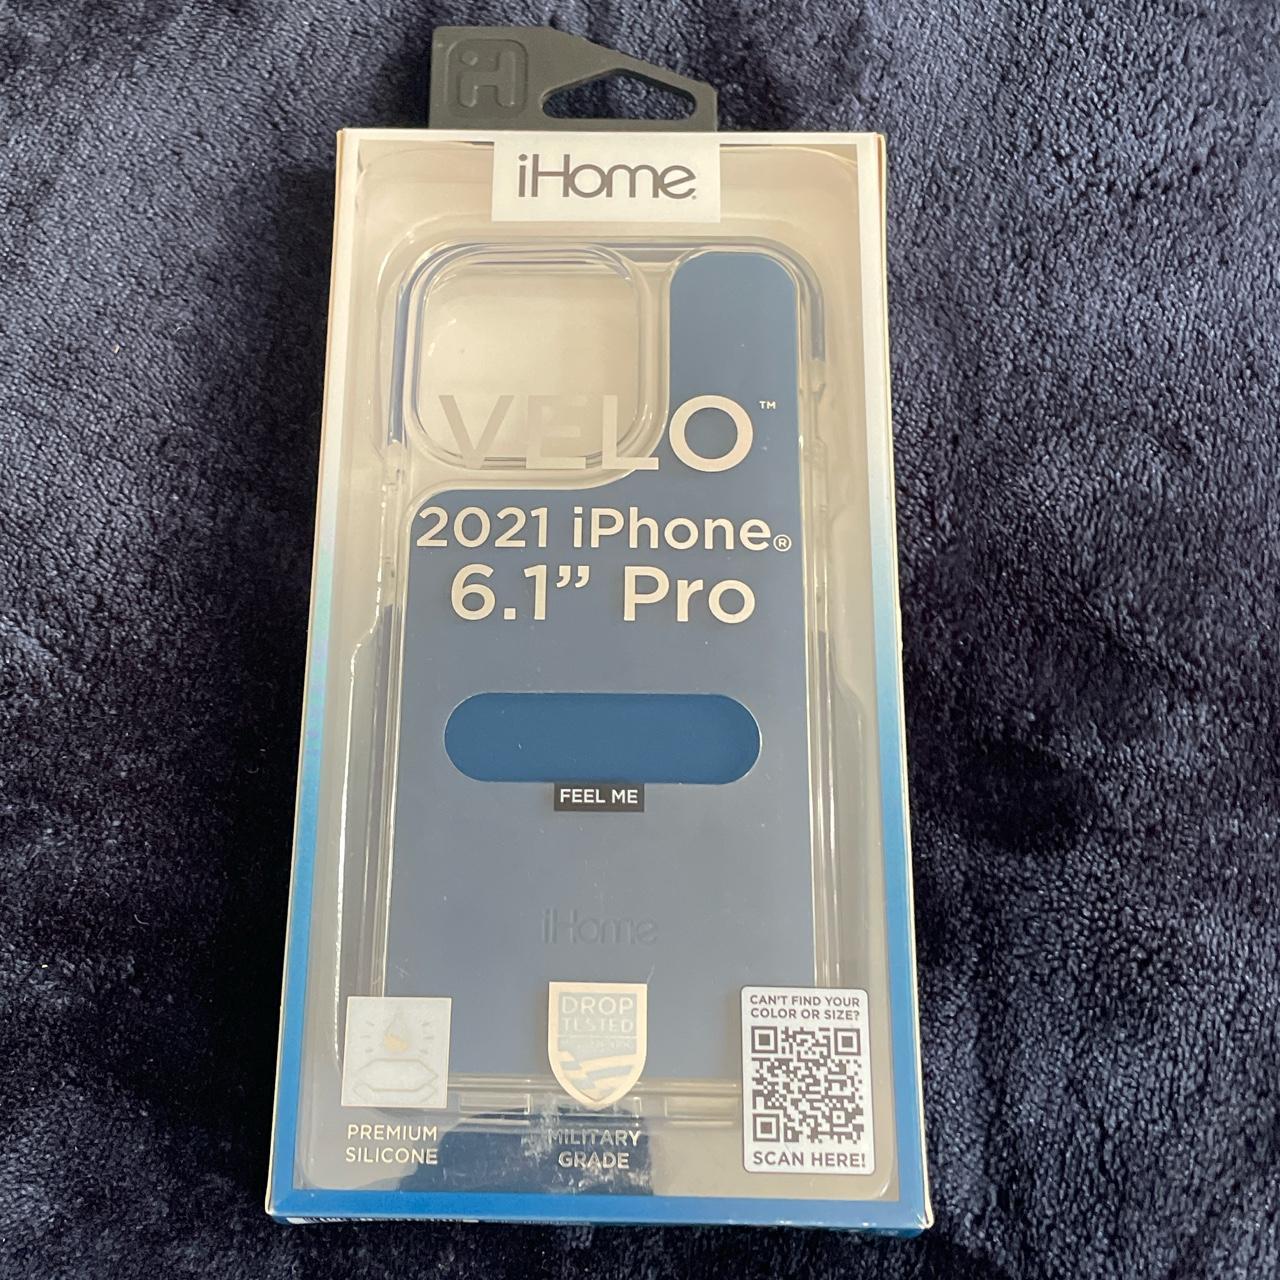 Product Image 1 - iPhone 13 pro case
Opened but